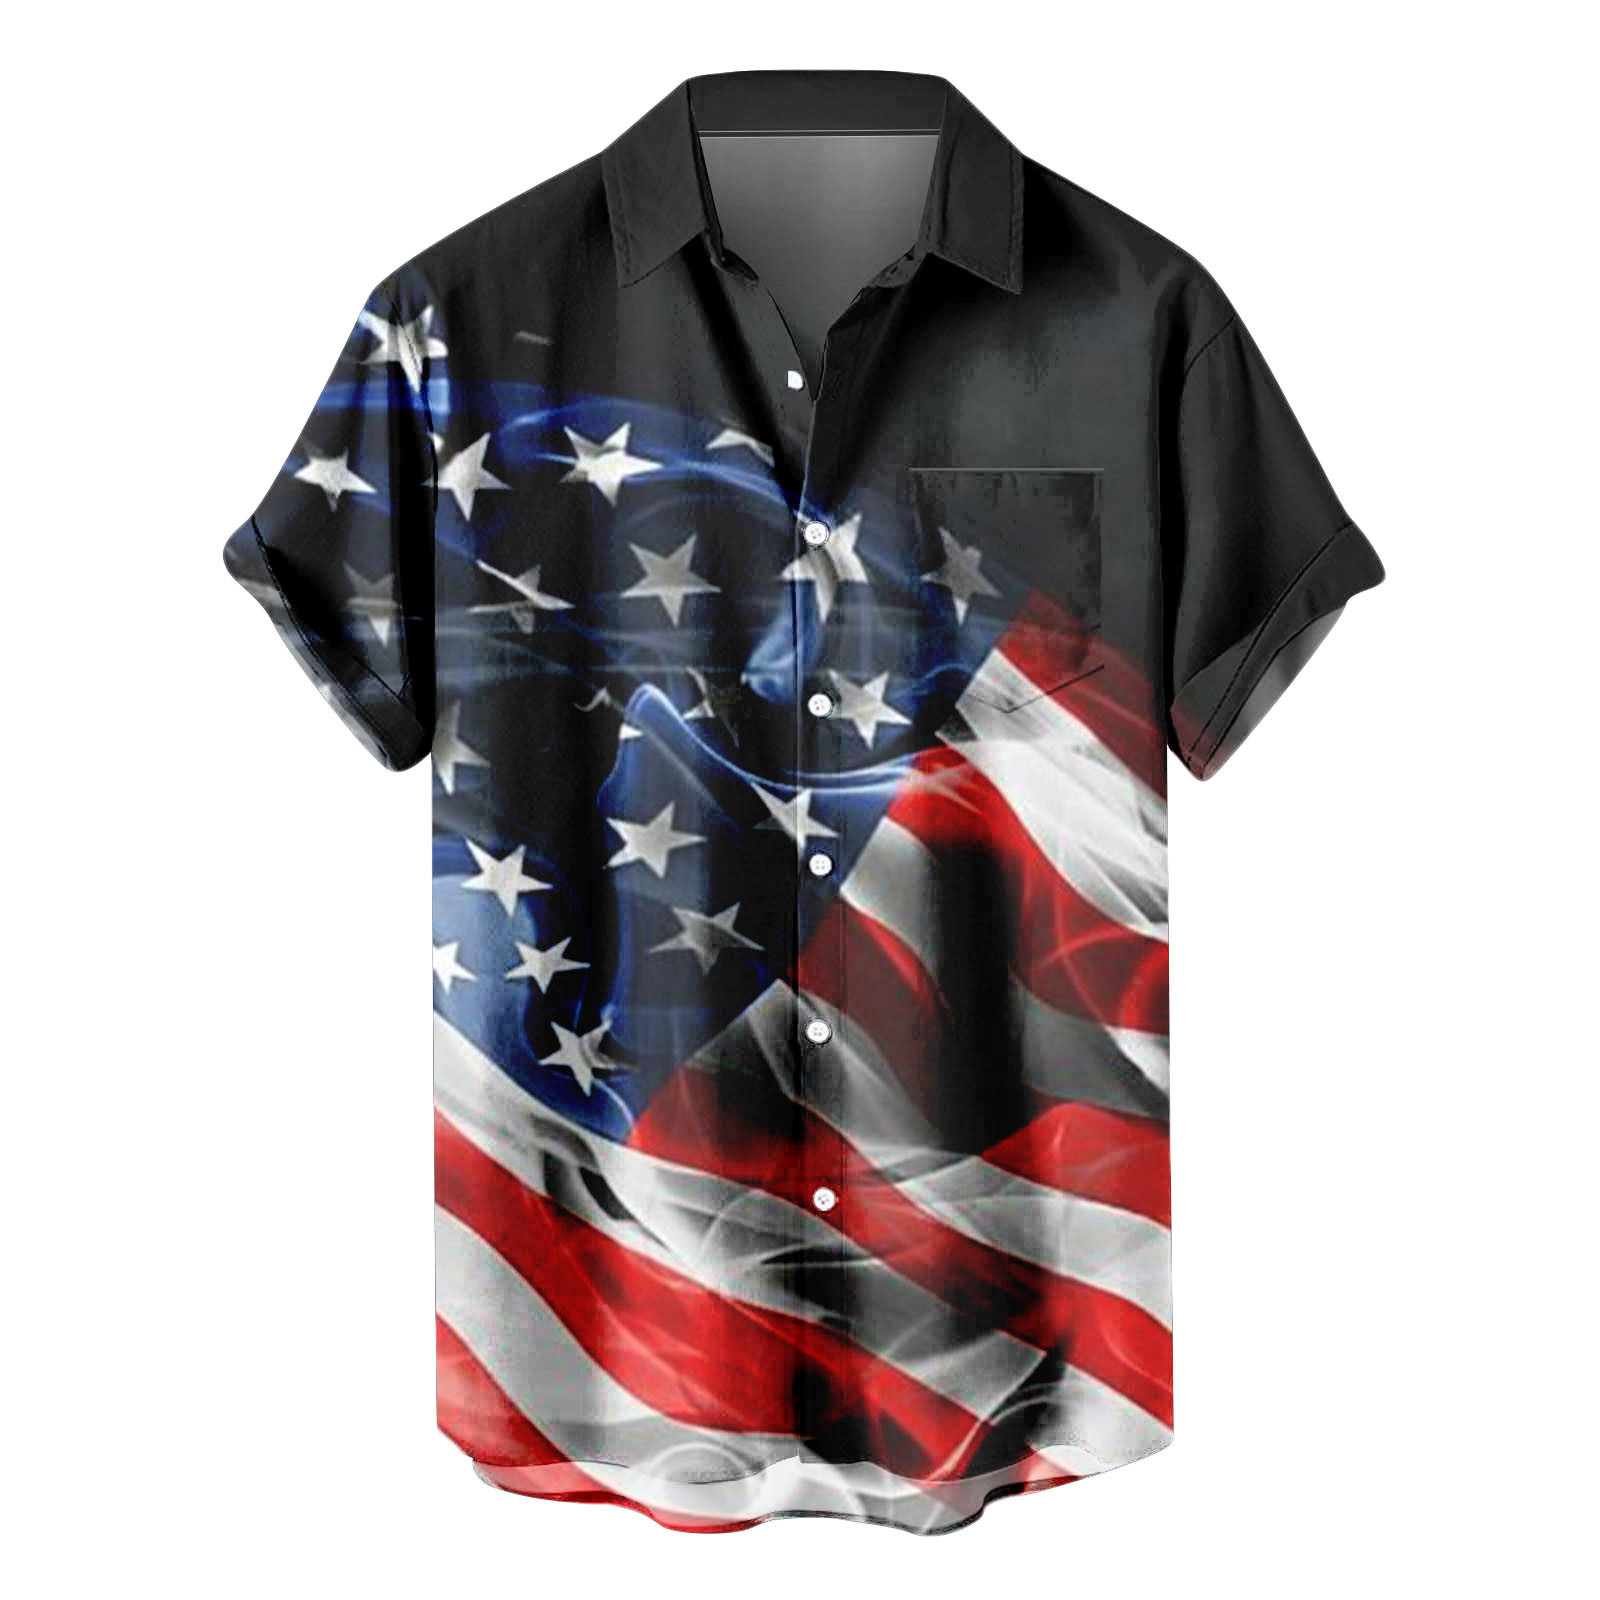 HangTaiLei 4th of July Shirts for Men USA Flag Printed Short Sleeve ...